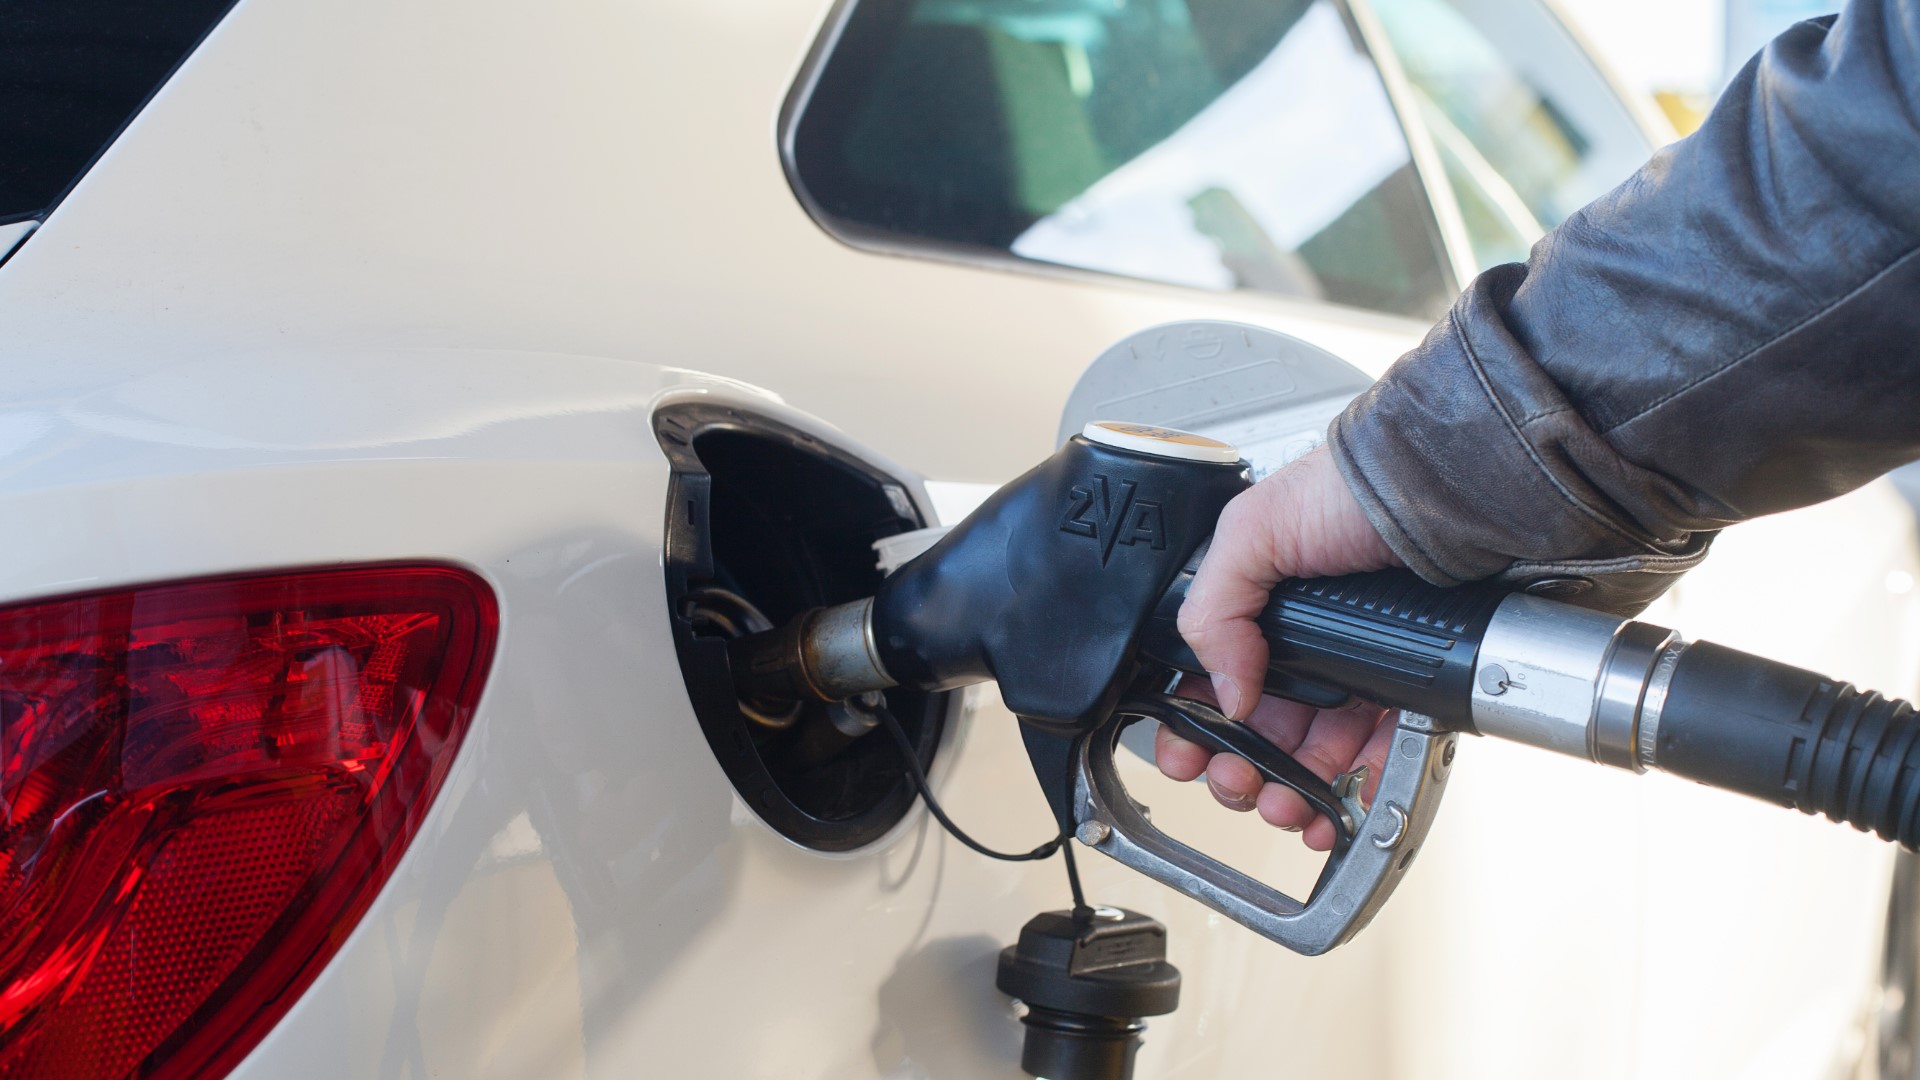 Gas prices in California are going up, and GasBuddy predicts that the state will have its highest average price since 2014. Why is that happening? Liz Kreutz connects the dots.